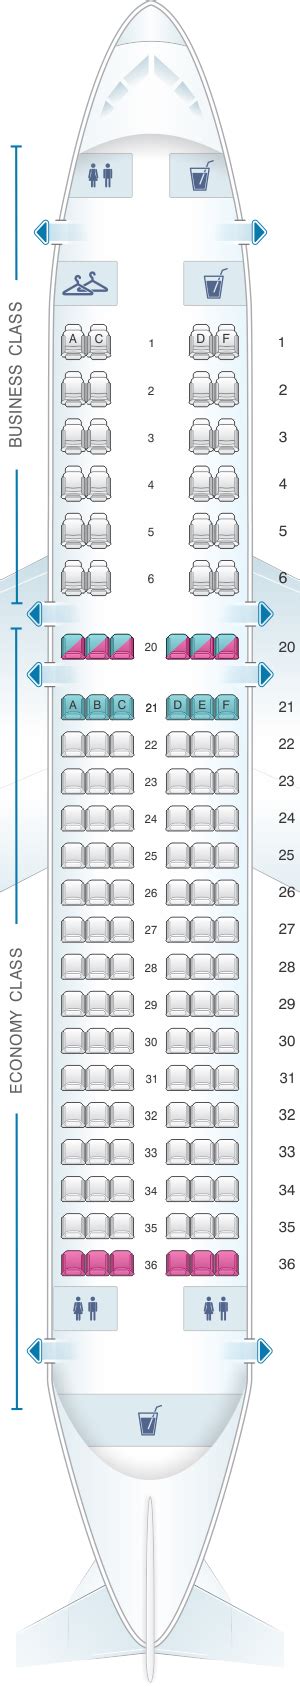 Airbus A320 Business Cl Seating Plan Tutorial Pics